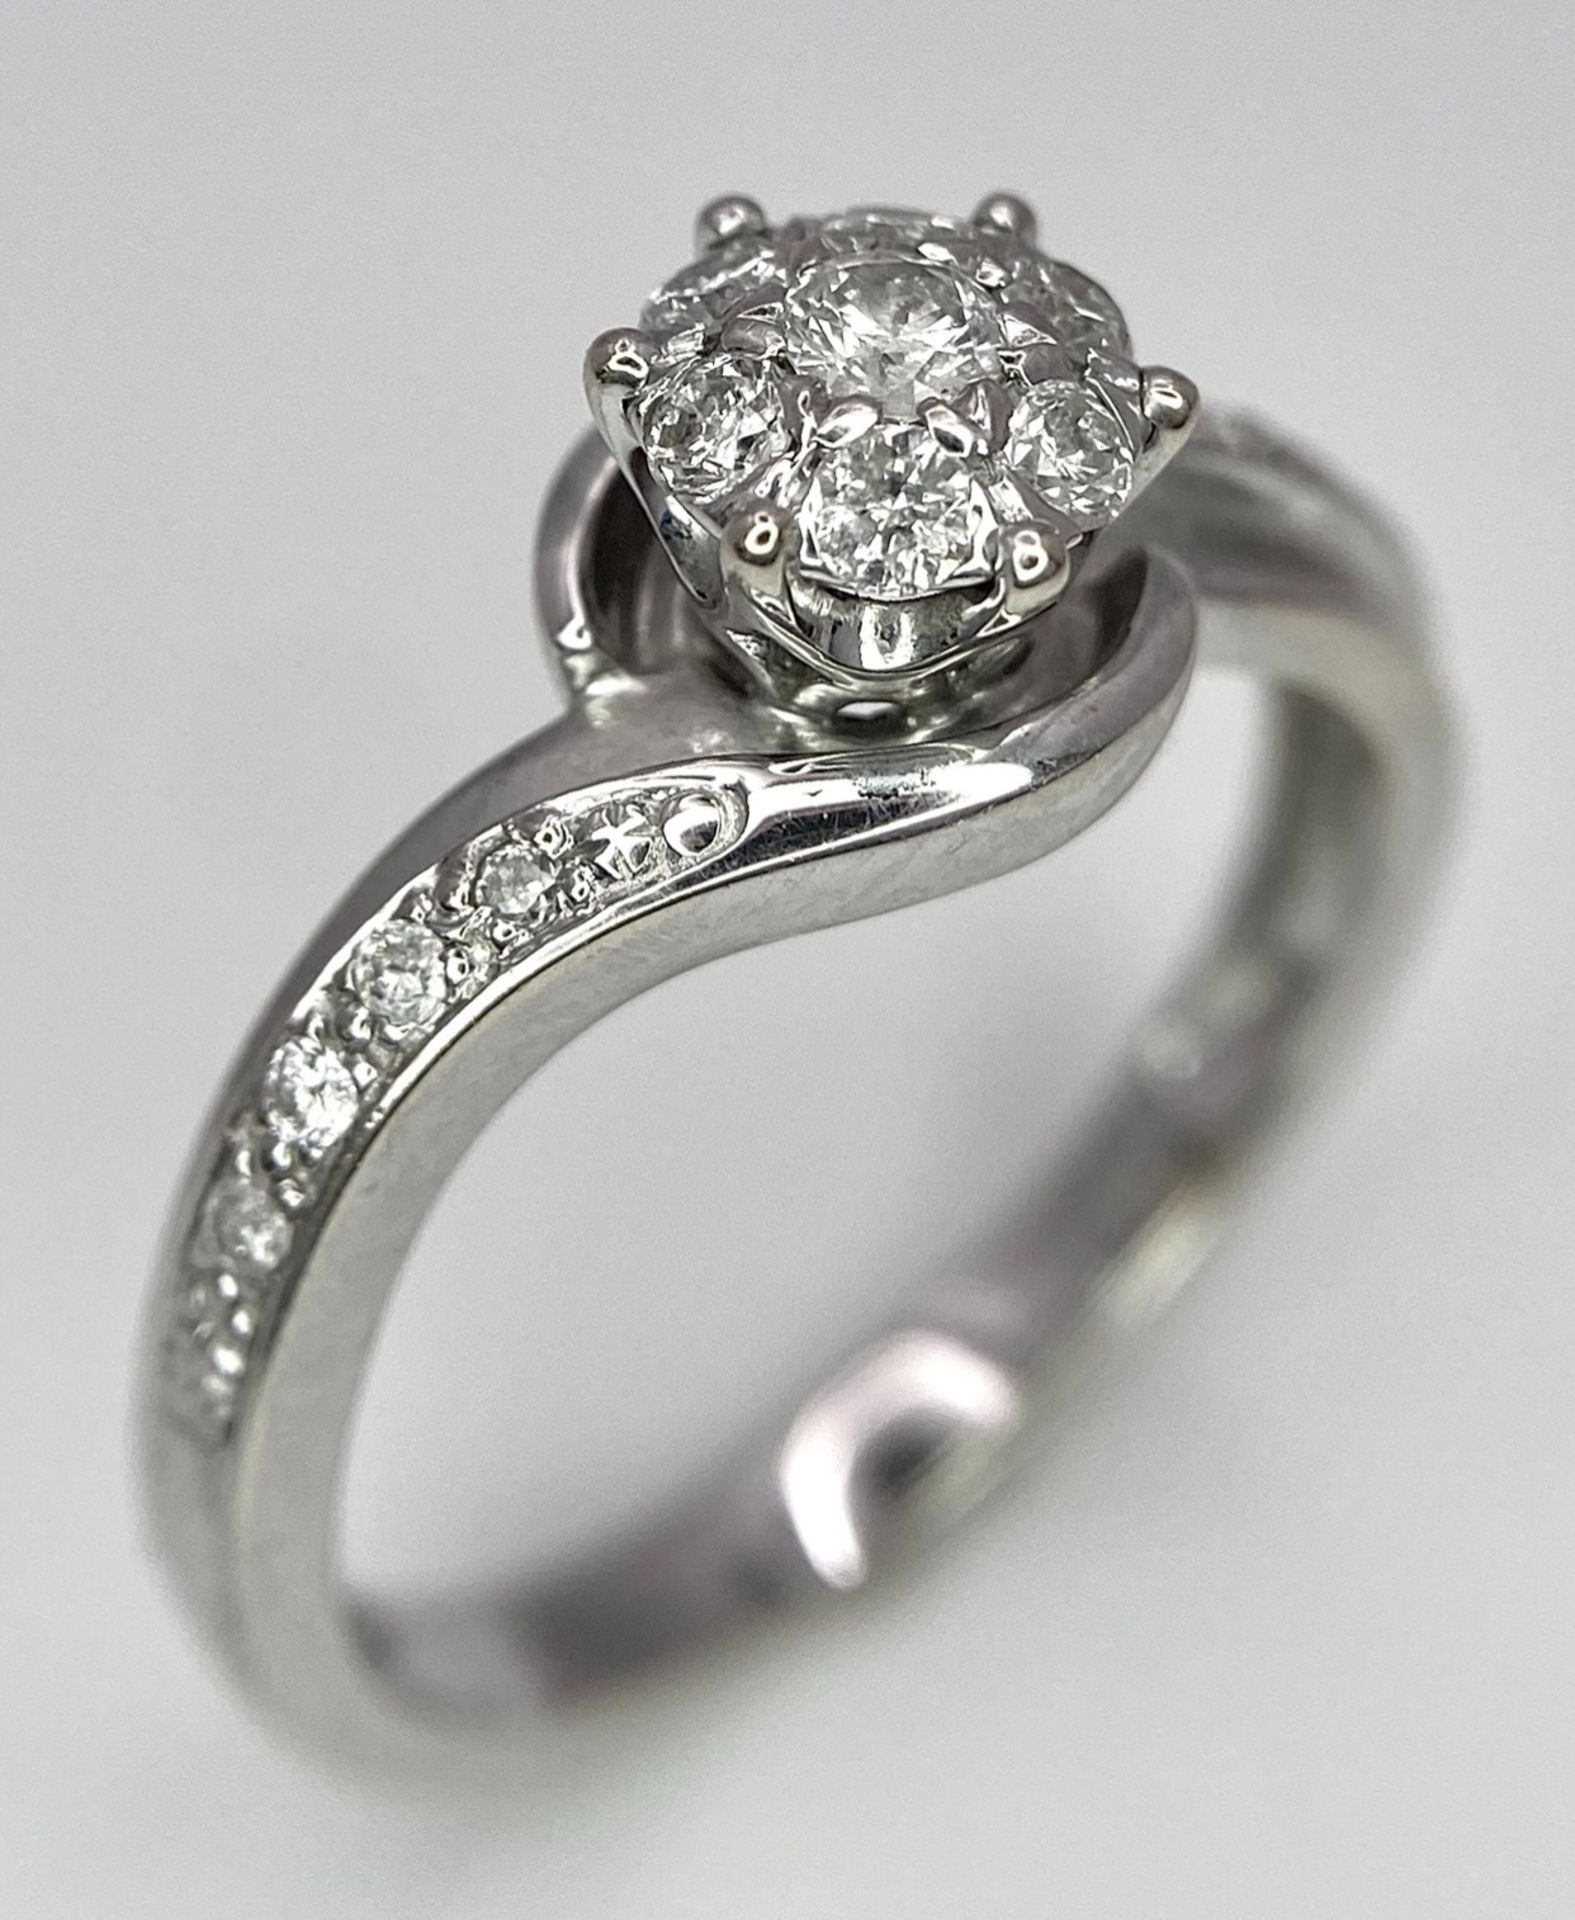 A 9K WHITE GOLD DIAMOND RING. 0.25ctw, Size L, 2.3g total weight. Ref: 8034 - Image 5 of 6